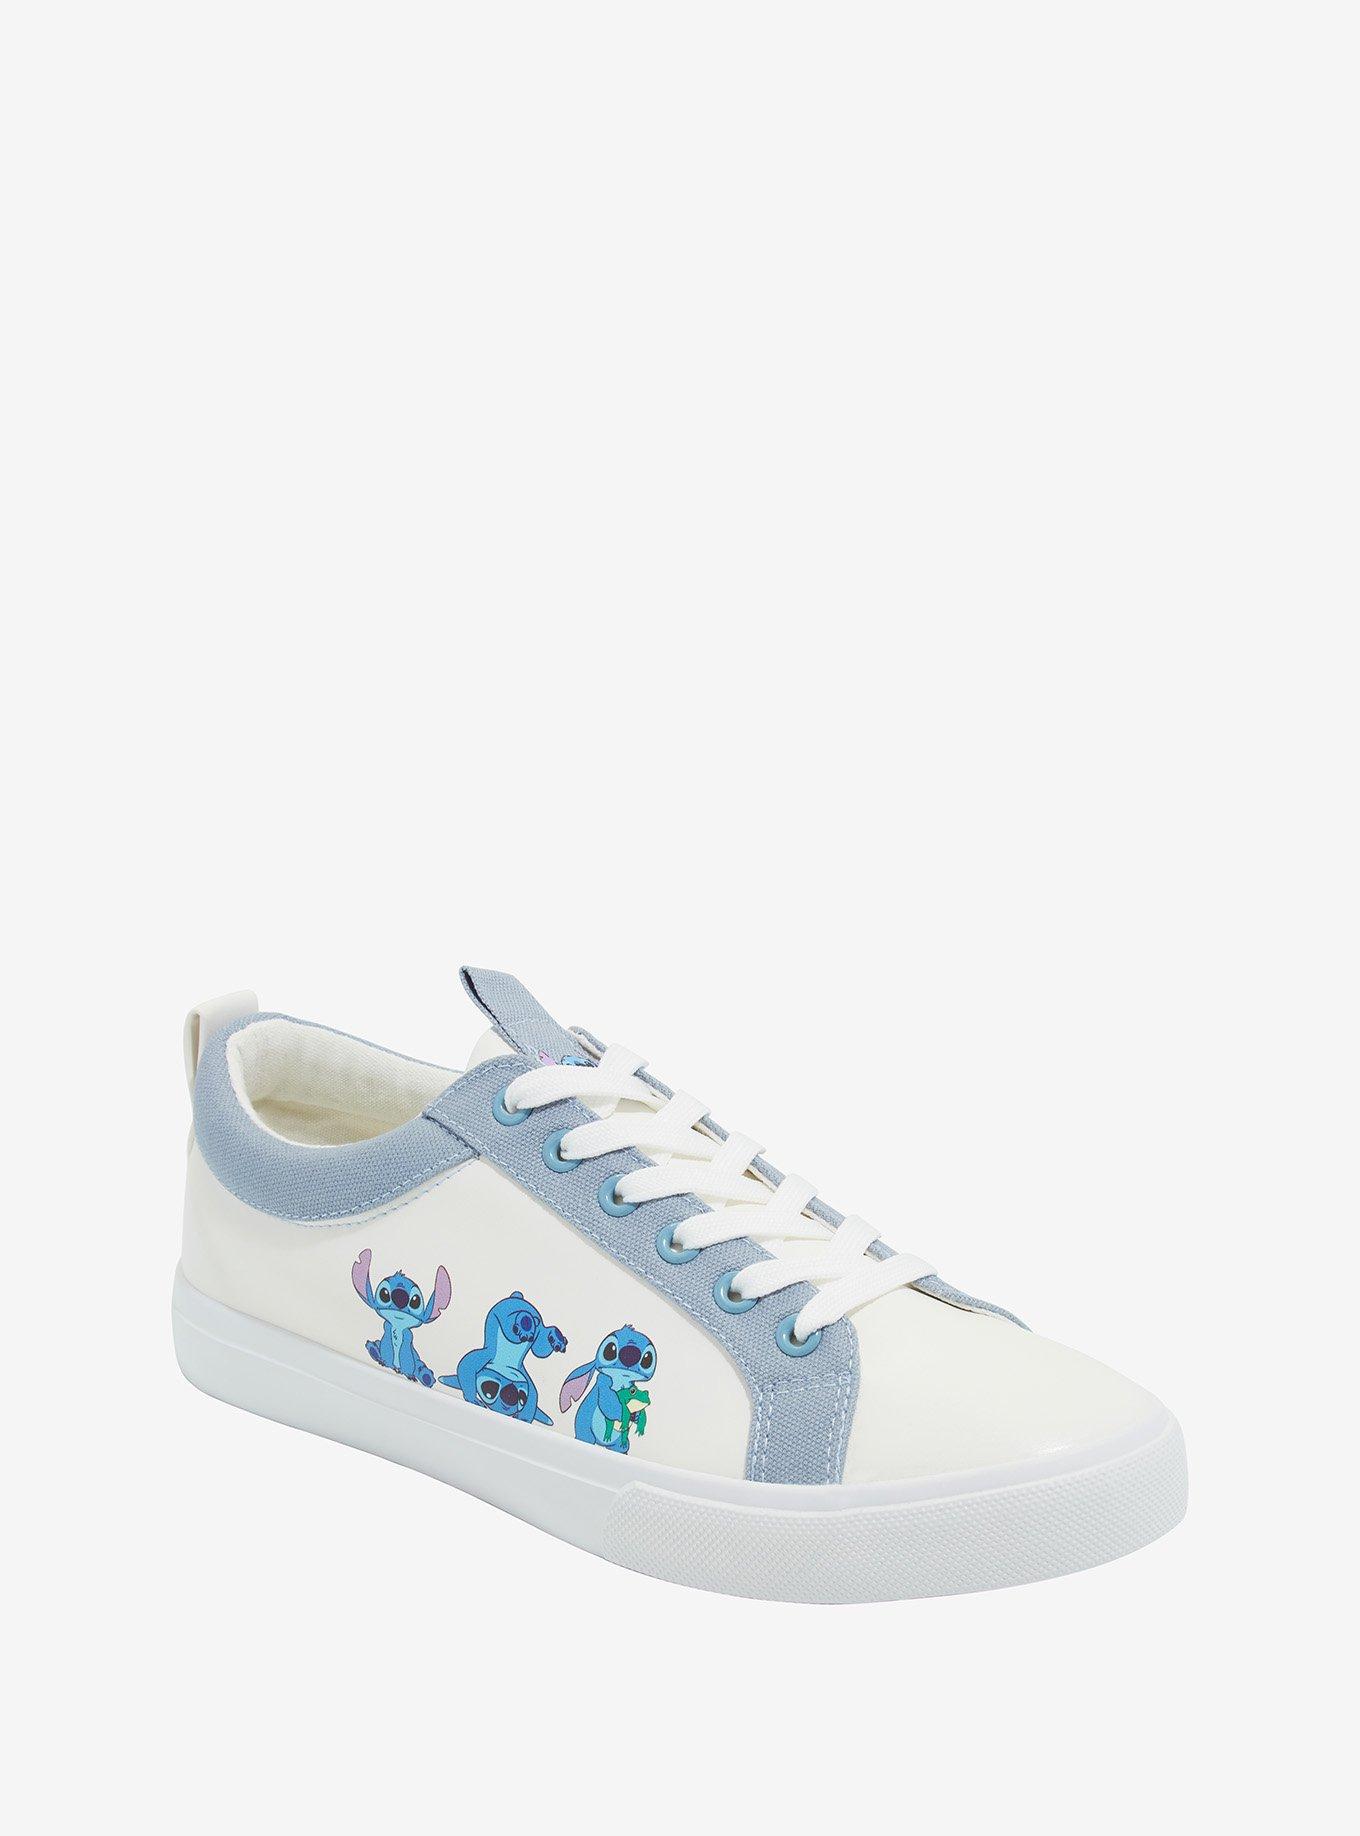 Disney Lilo & Stitch Poses Lace-Up Sneakers, MULTI, hi-res